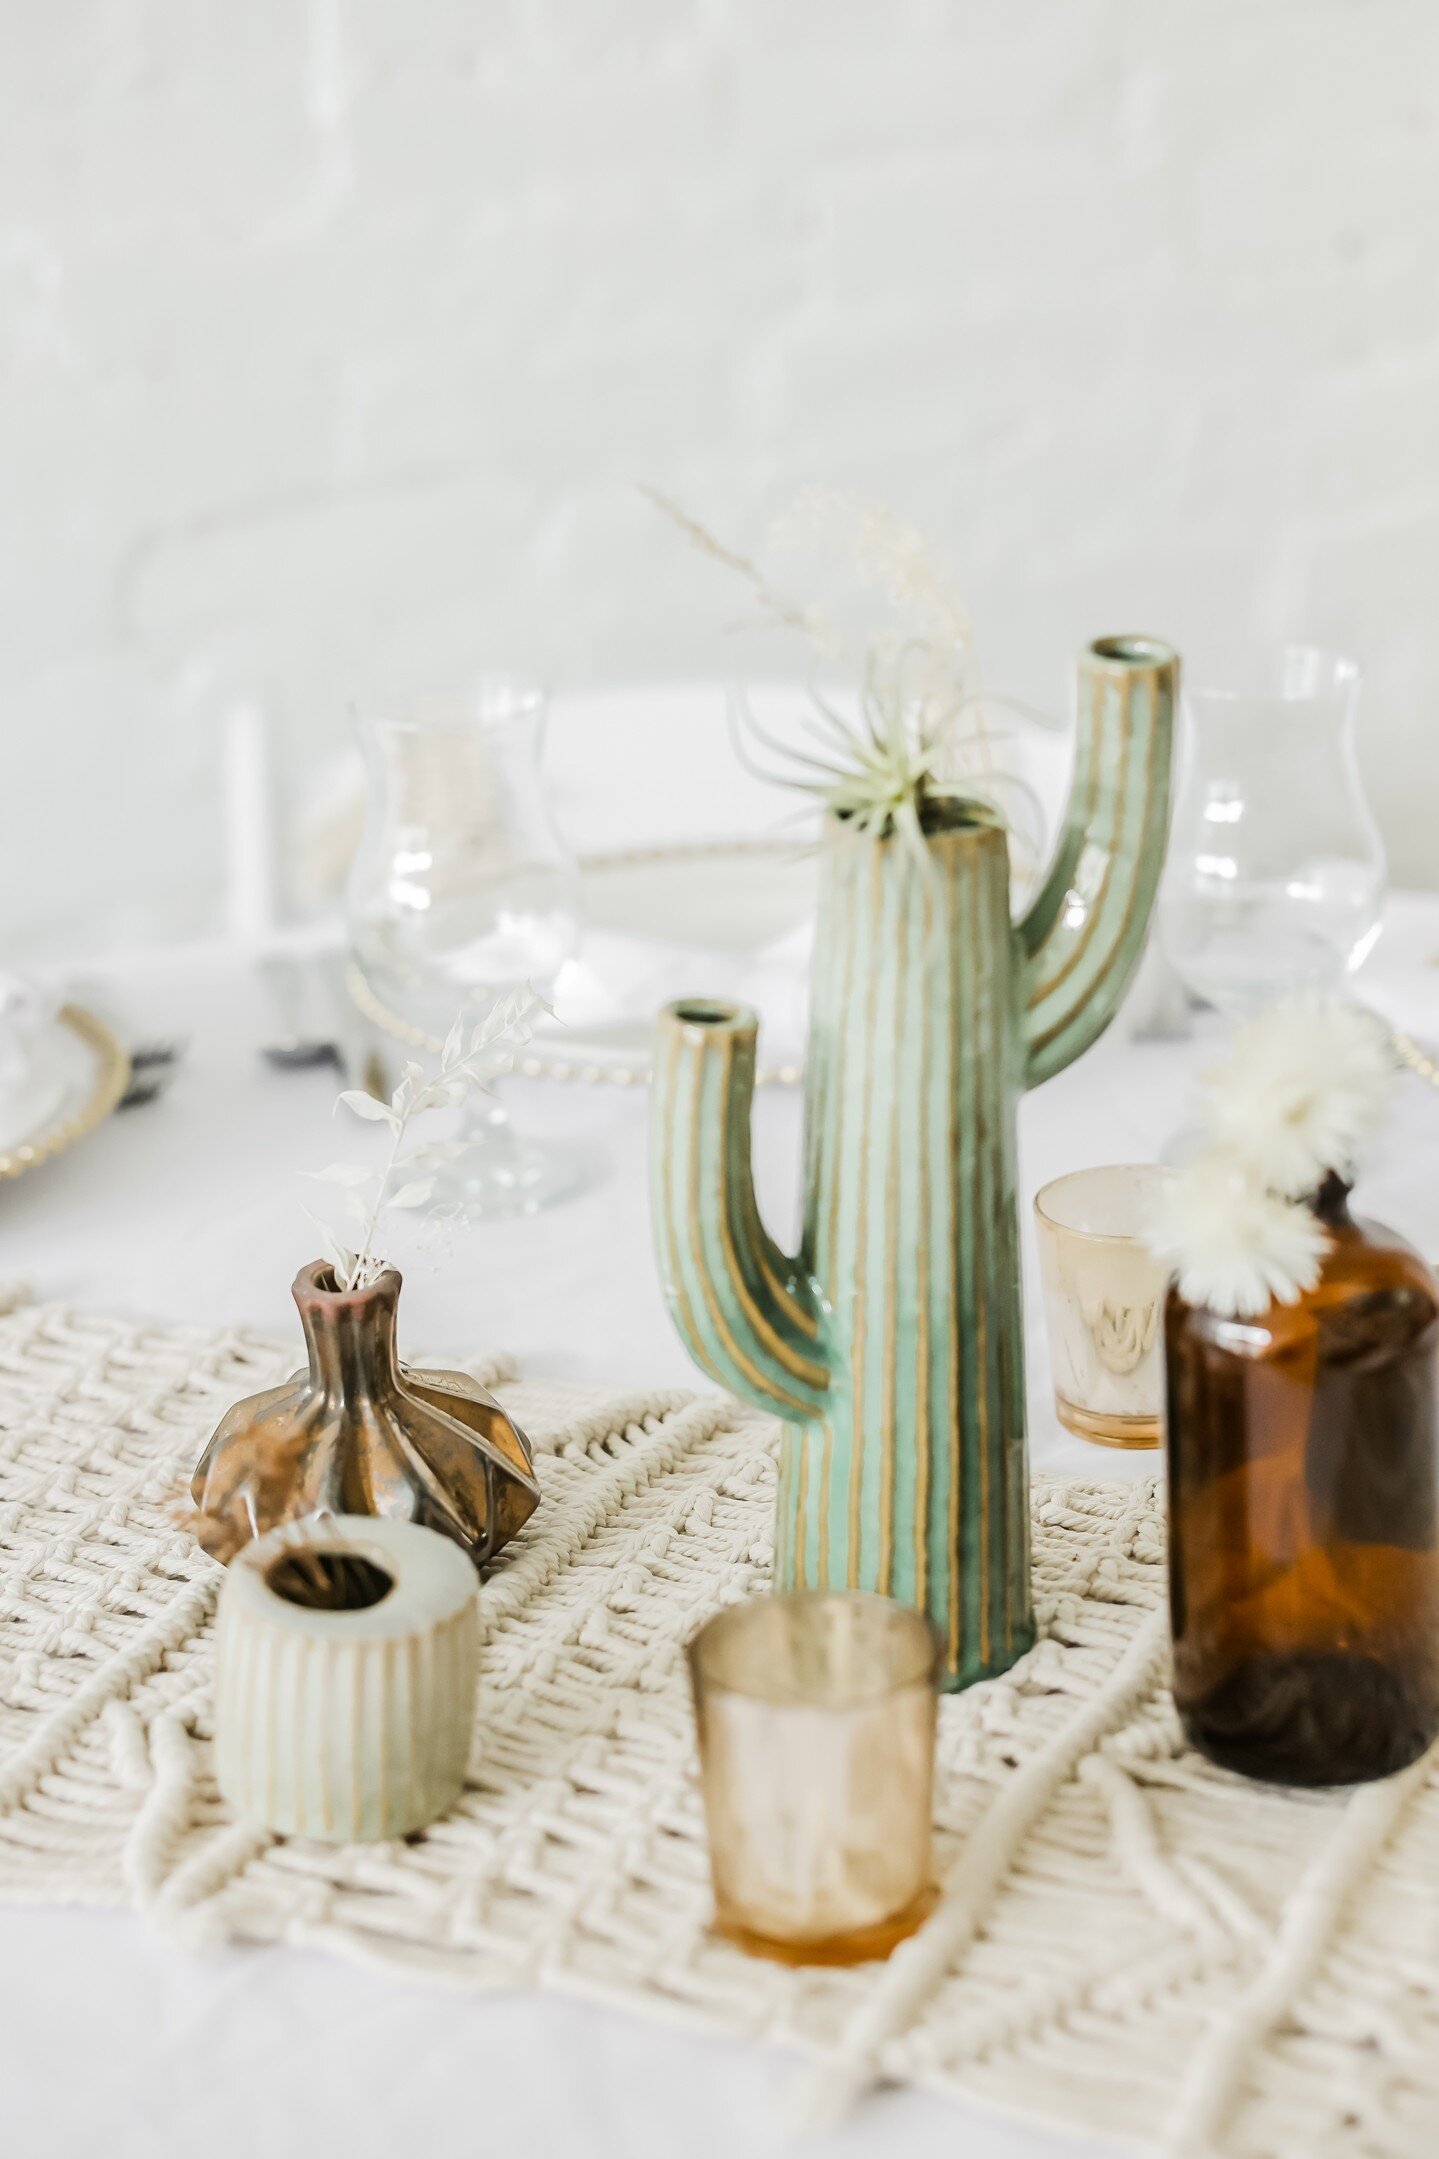 Boho 𝓬𝓱𝓲𝓬🌵Hints of tan, browns, and greens come together to create a beautiful and unique decor package that has a western flare to it🤠
*
*
*
#ohiopartyvenue #ohioeventspace #ohioeventvenue #bridetobe #ohwedding #kywedding #cincinnatiwedding #c